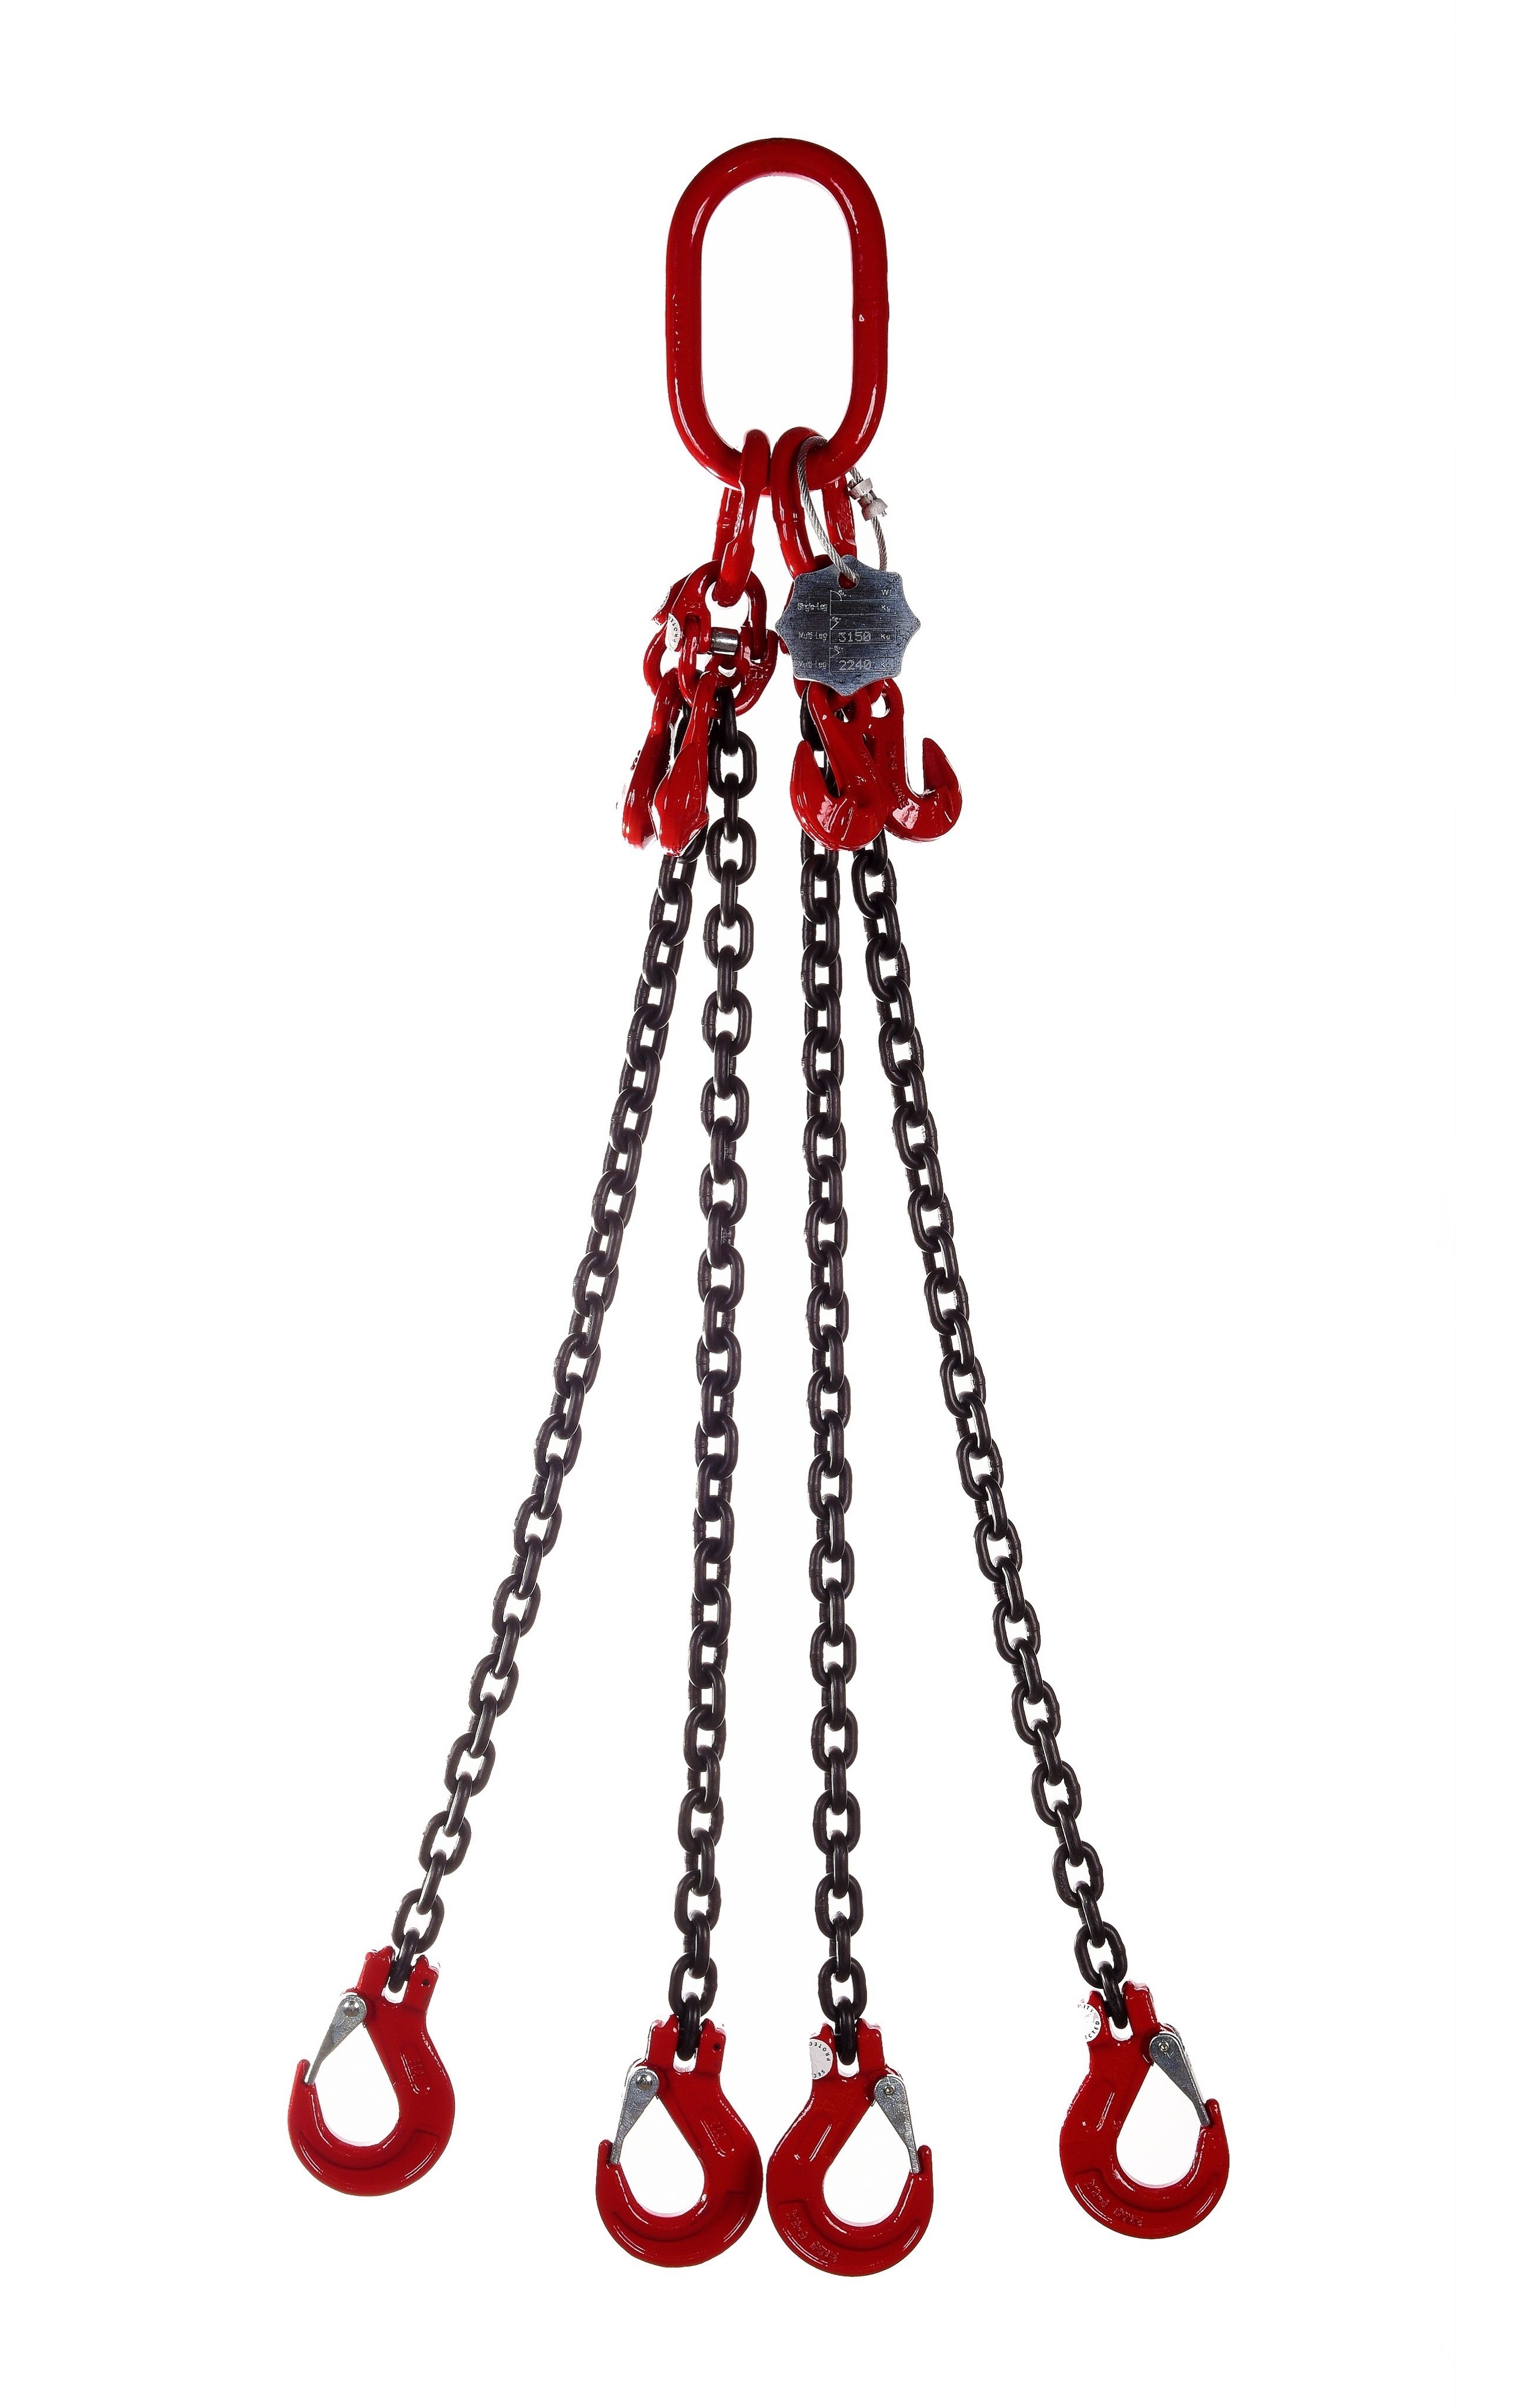 4 Leg 23.6tonne 19mm Lifting Chain Sling with choice of length and hooks – With Shortening Hook – 4mtr – Clevis Sling Hook – Chain Slings – WSB